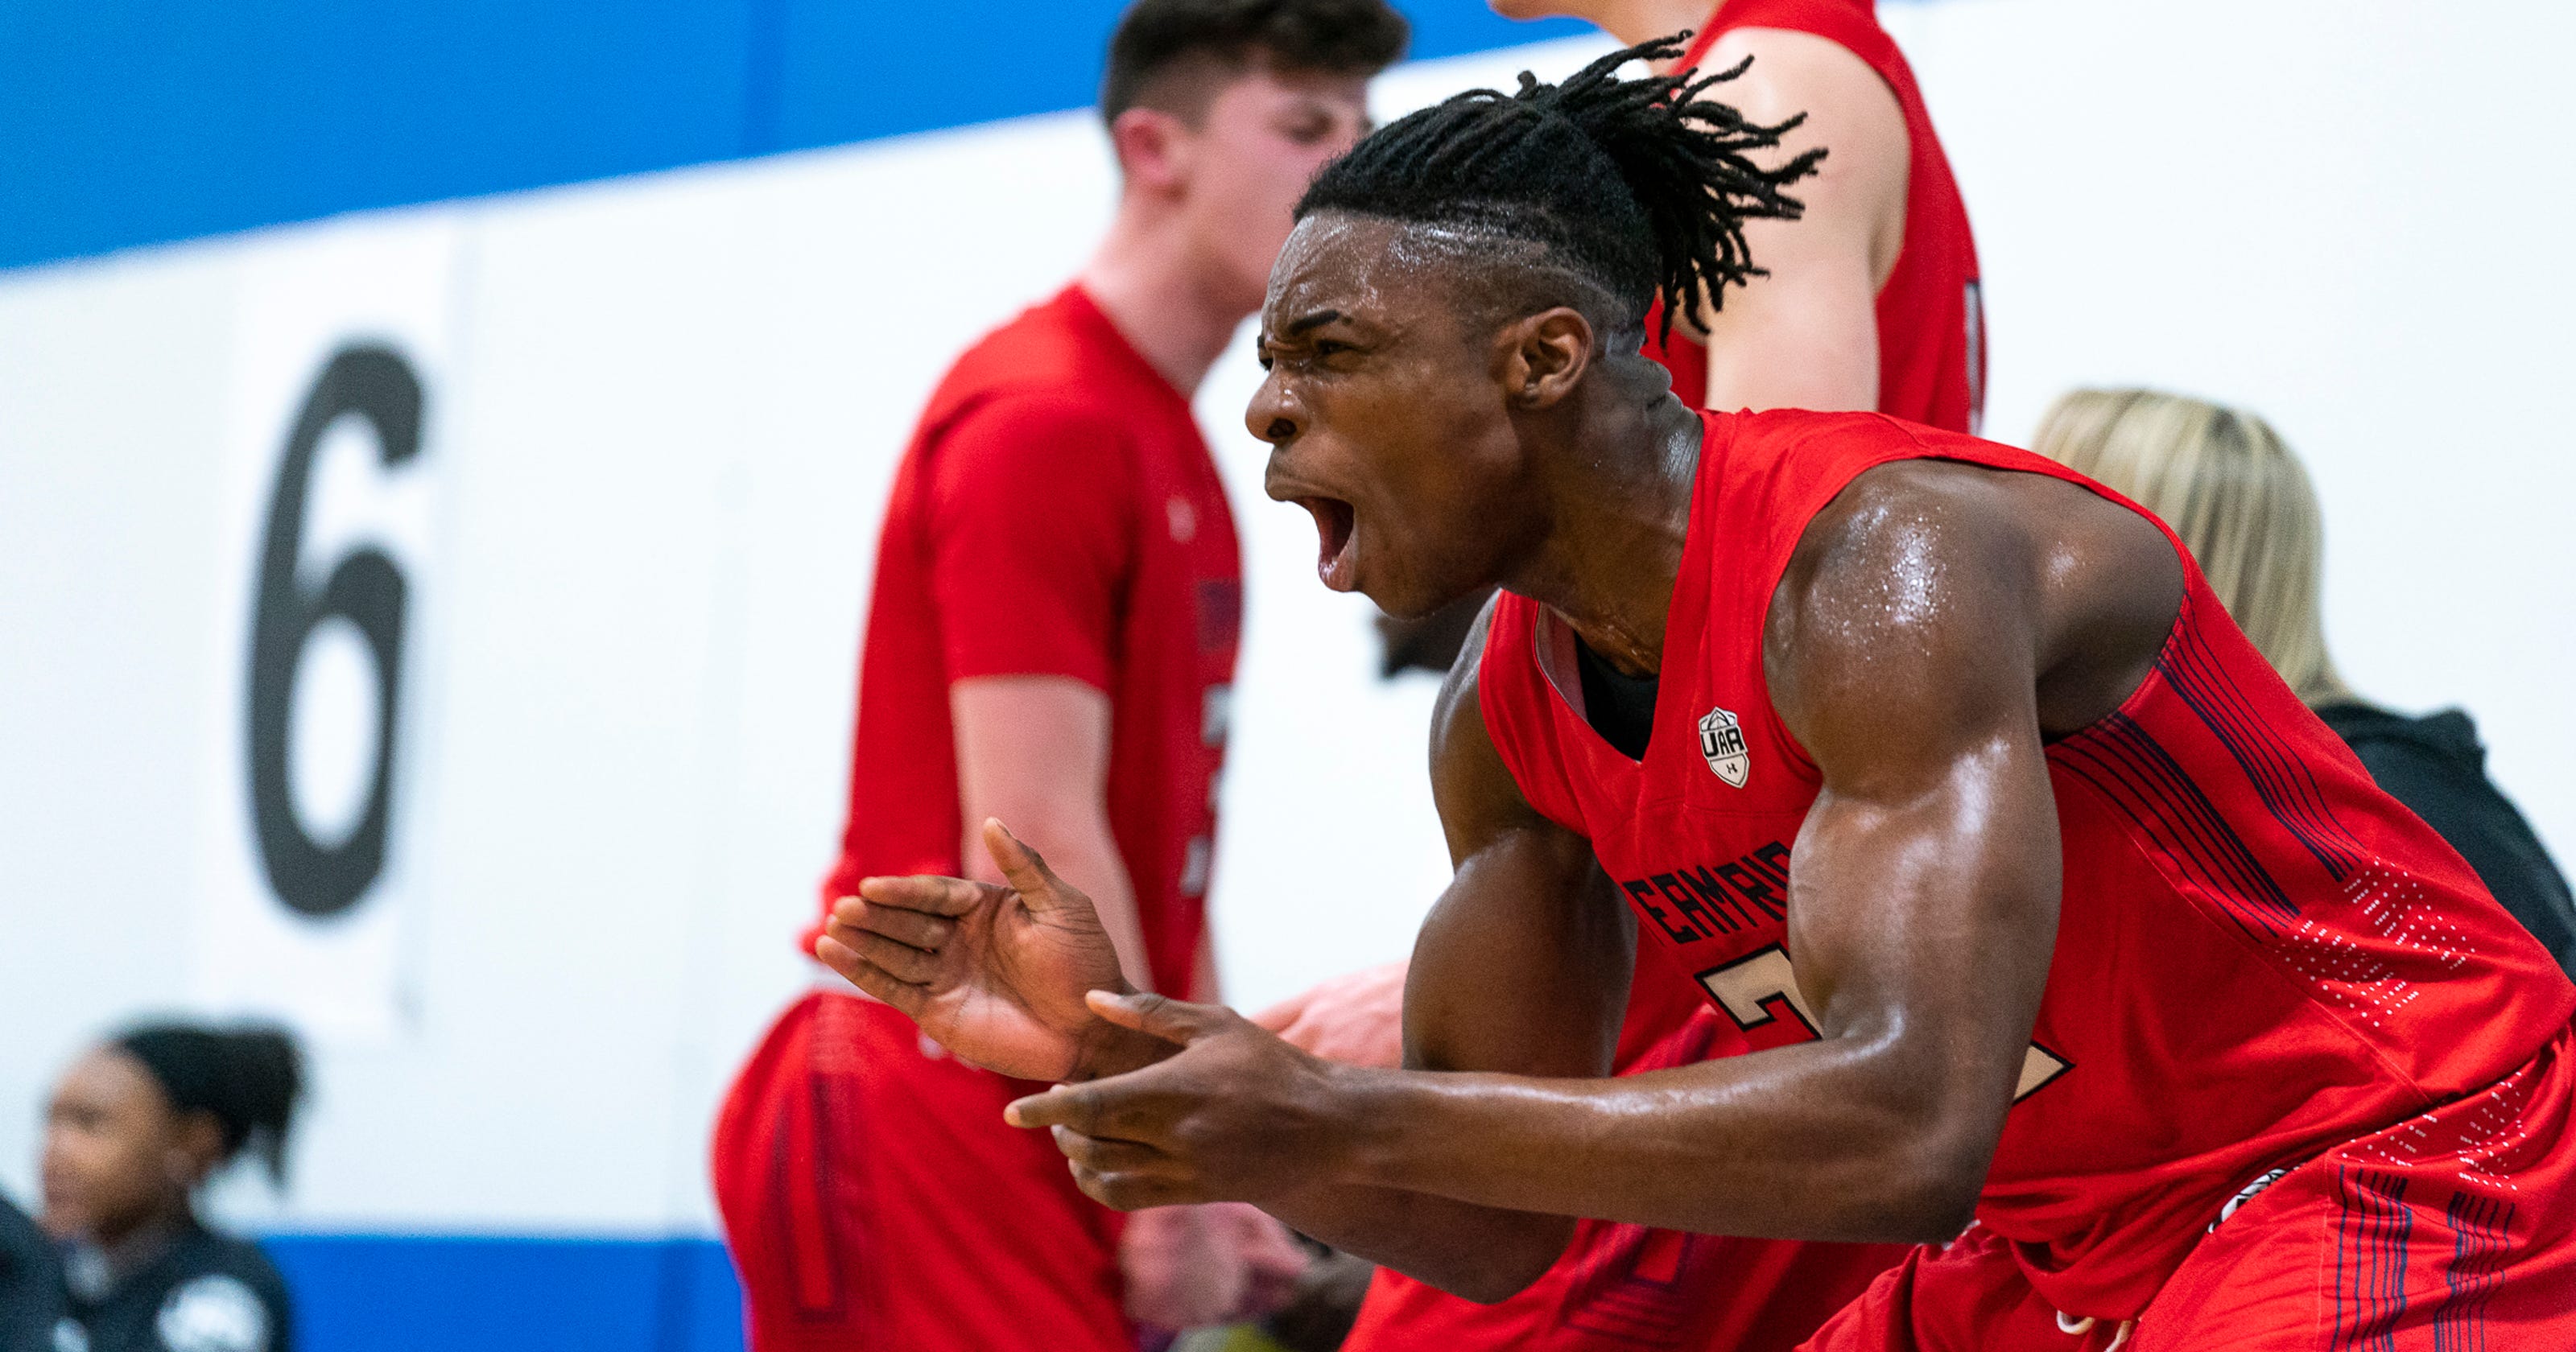 Louisville basketball recruiting: New look at 2019 wish list